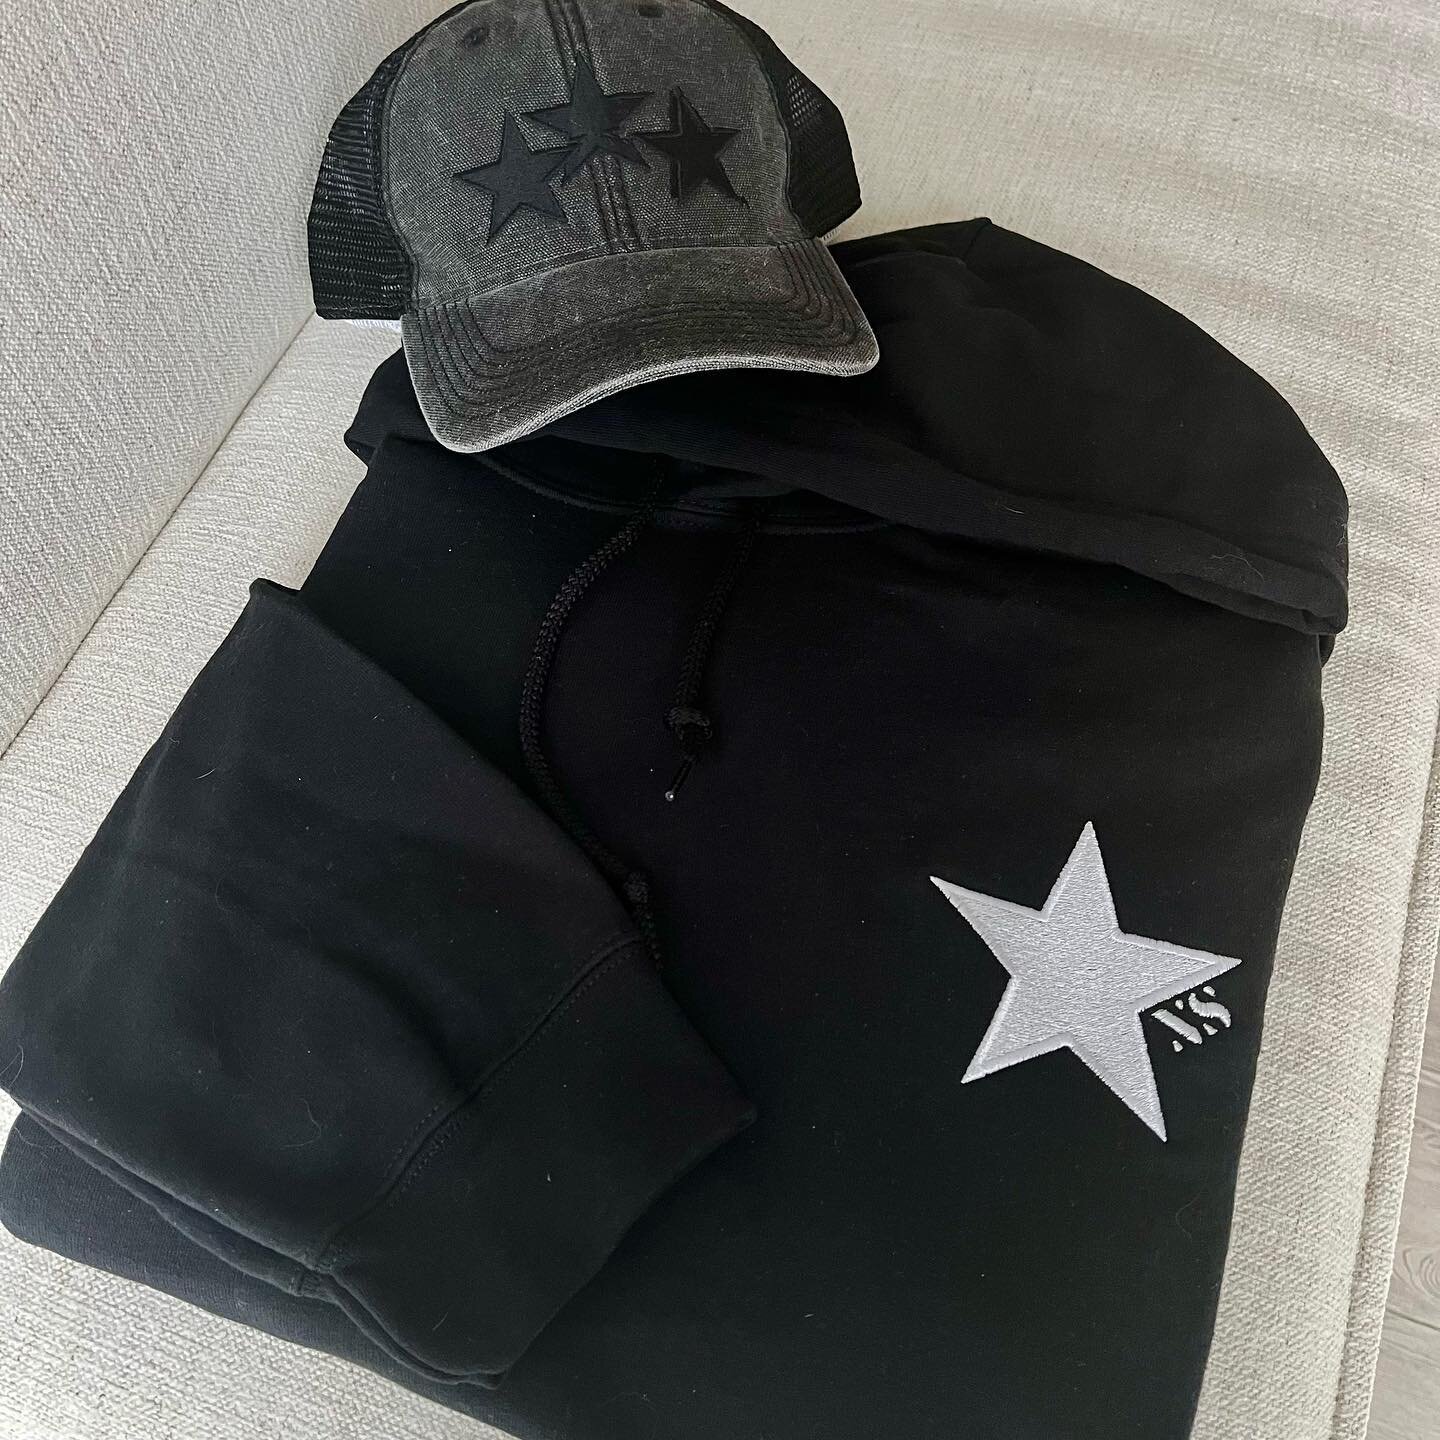 STARRY NIGHT🌠
:: ::
Design/event planning @sparkgroupevents 
Hats @league_legacy 
#swag #swagbag #hoodie #hat #truckerhat #swag #swagbag #sweet16 #blackonblack #whiteonblack #embroidery #corbinstyle